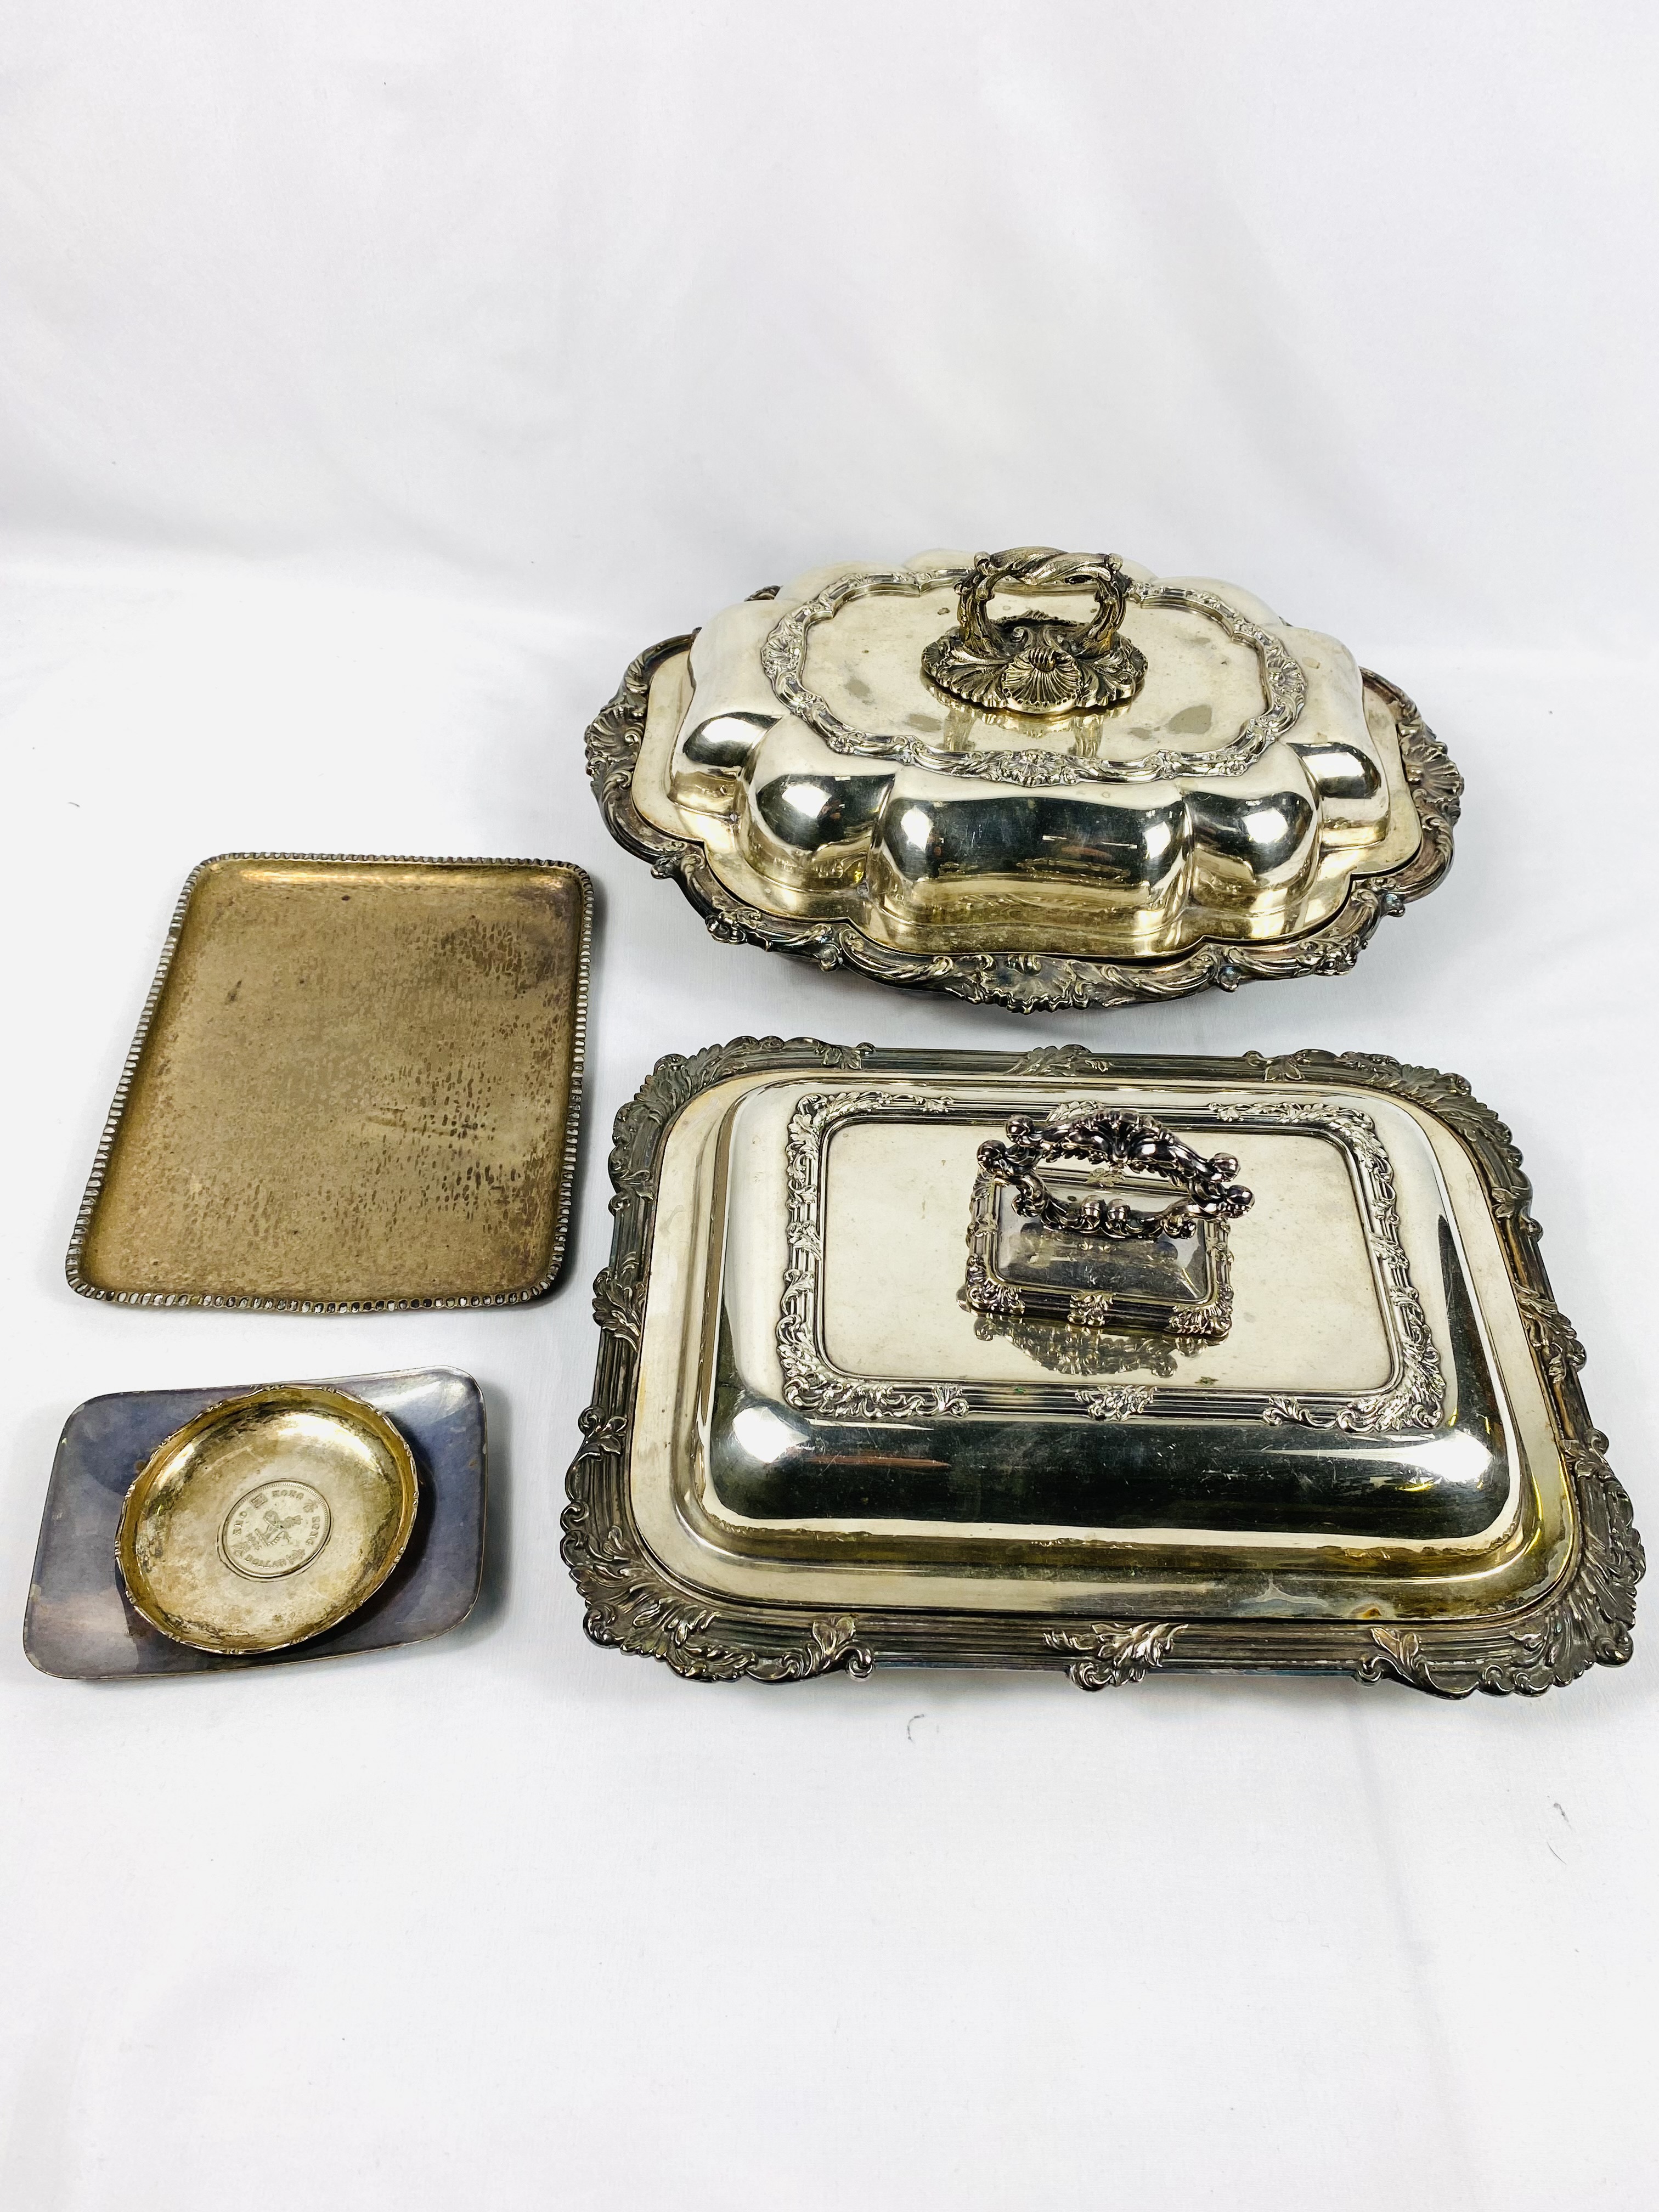 Two silver plate entree dishes and other items